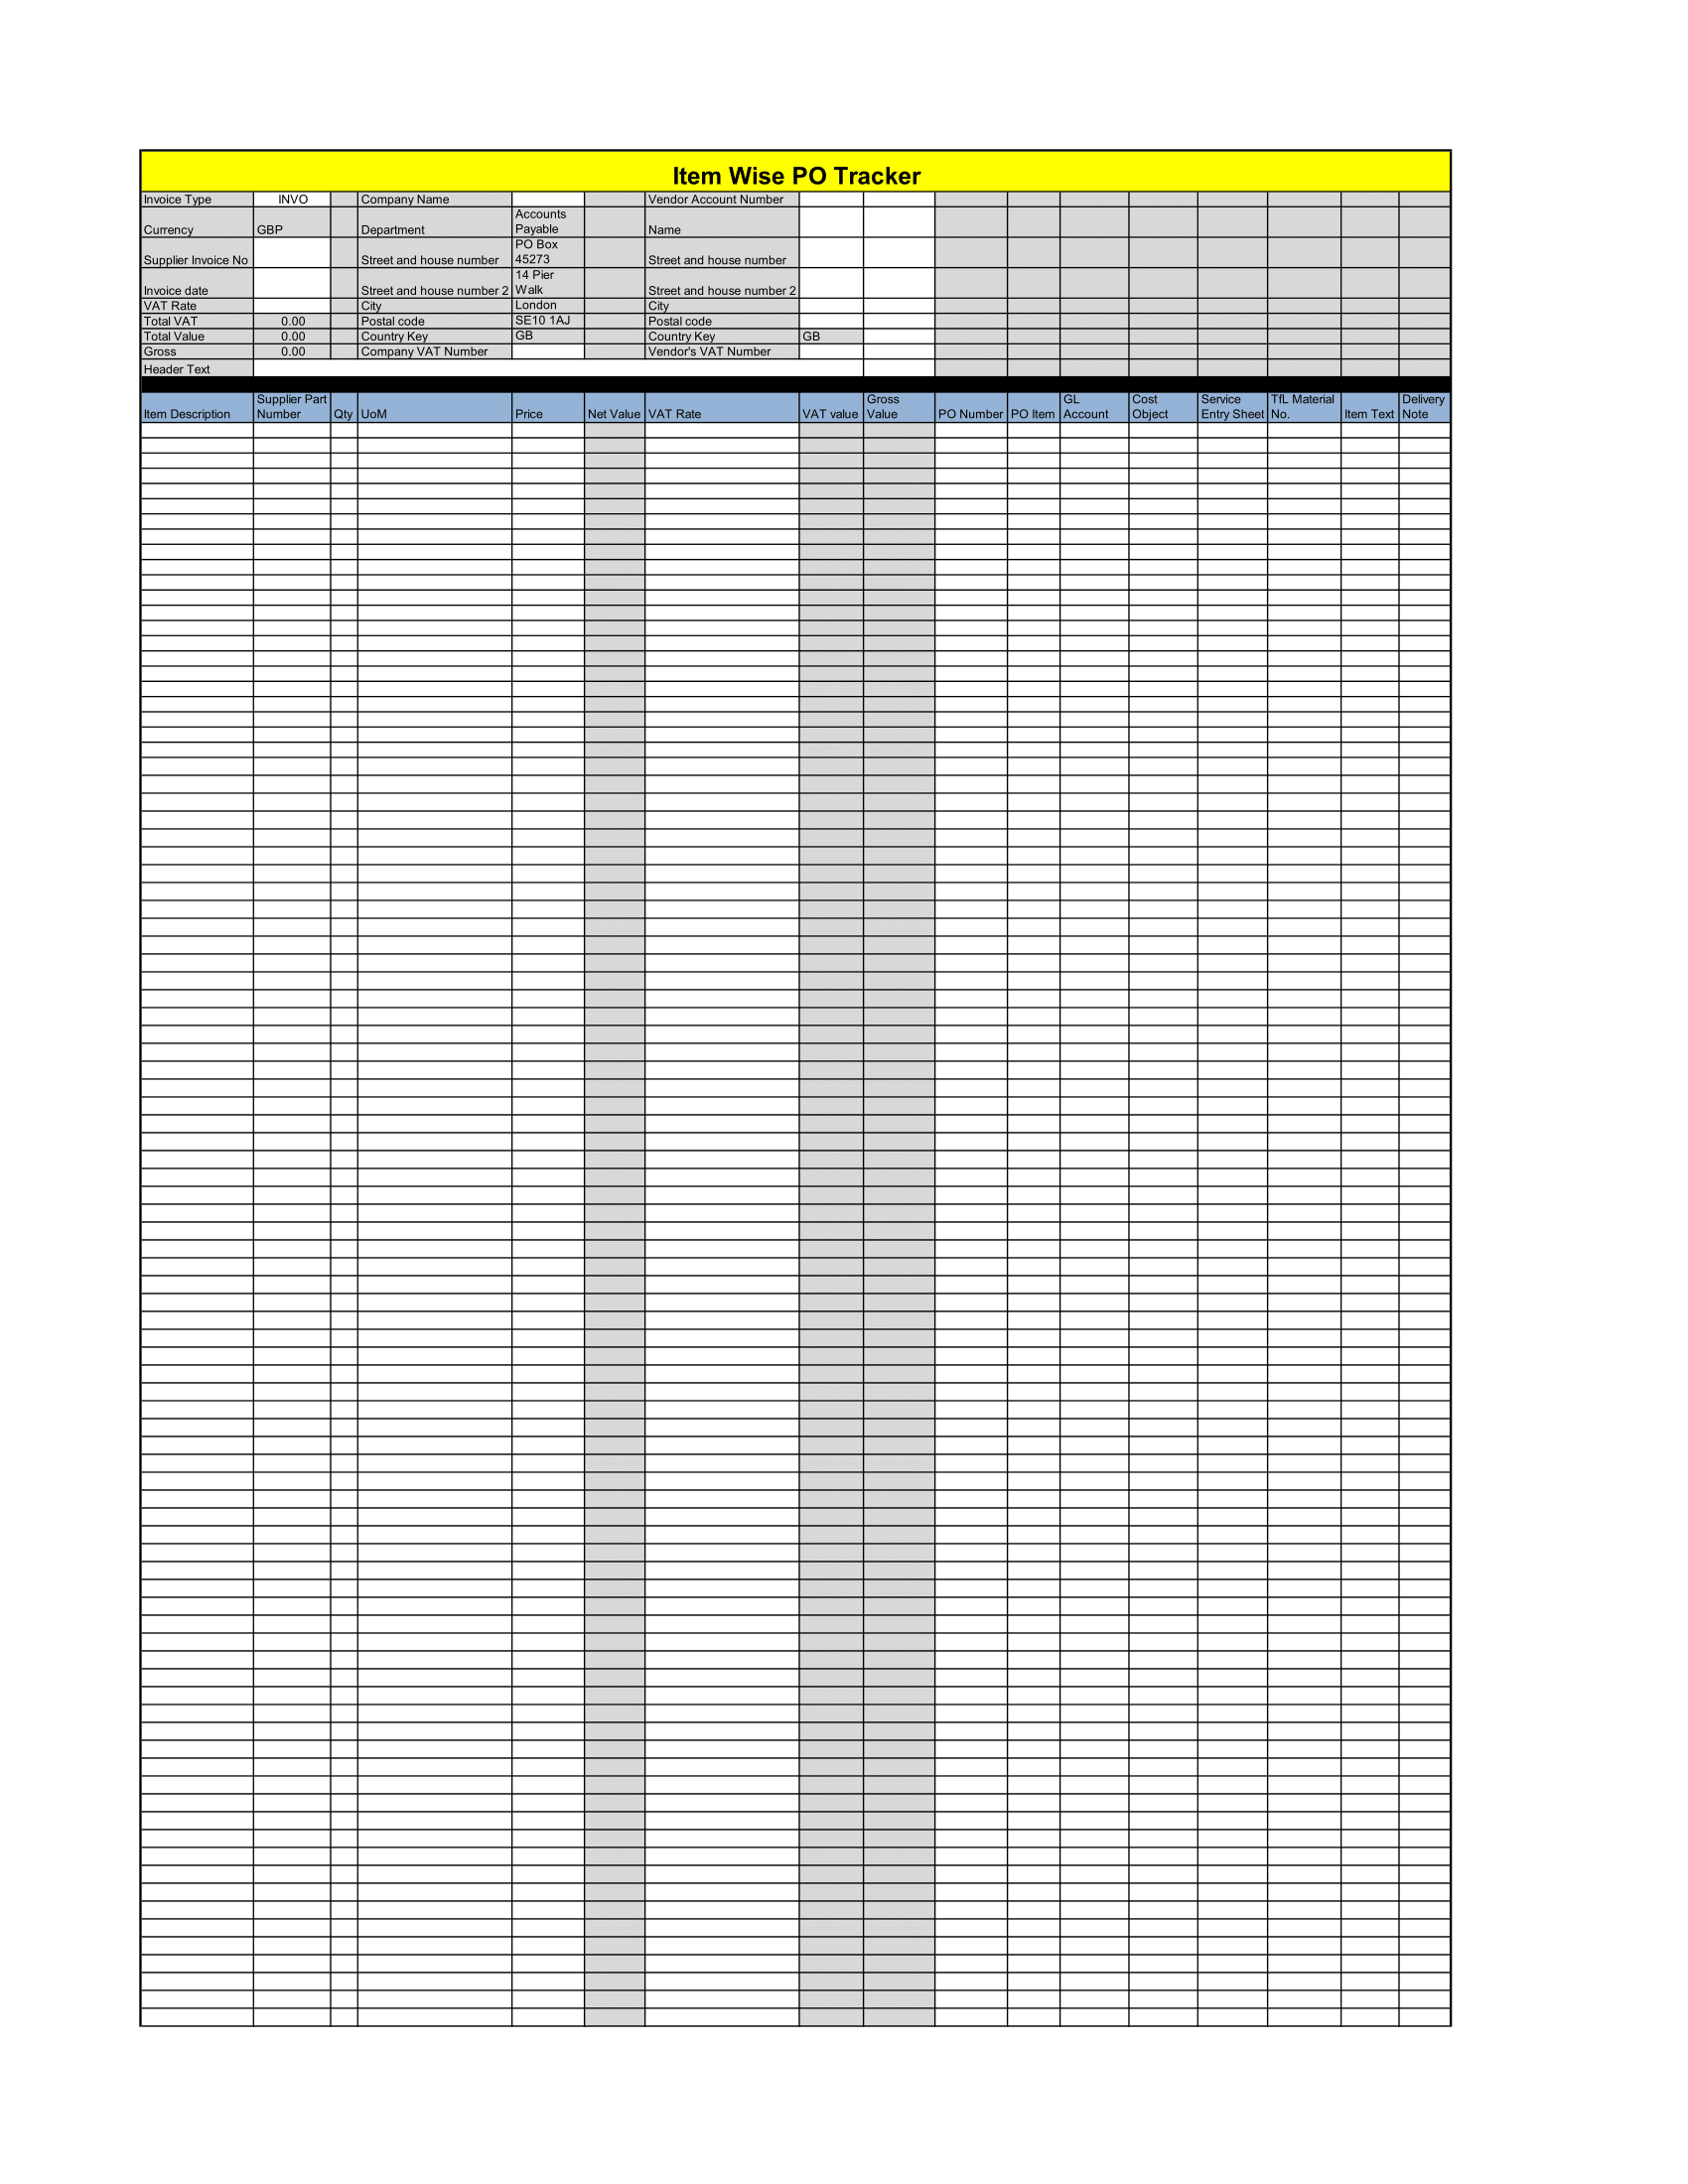 Item wise Purchase Order Tracking Sheet in Excel by FormatWorks. Download Now and start keeping track on the purchase orders released in your business.